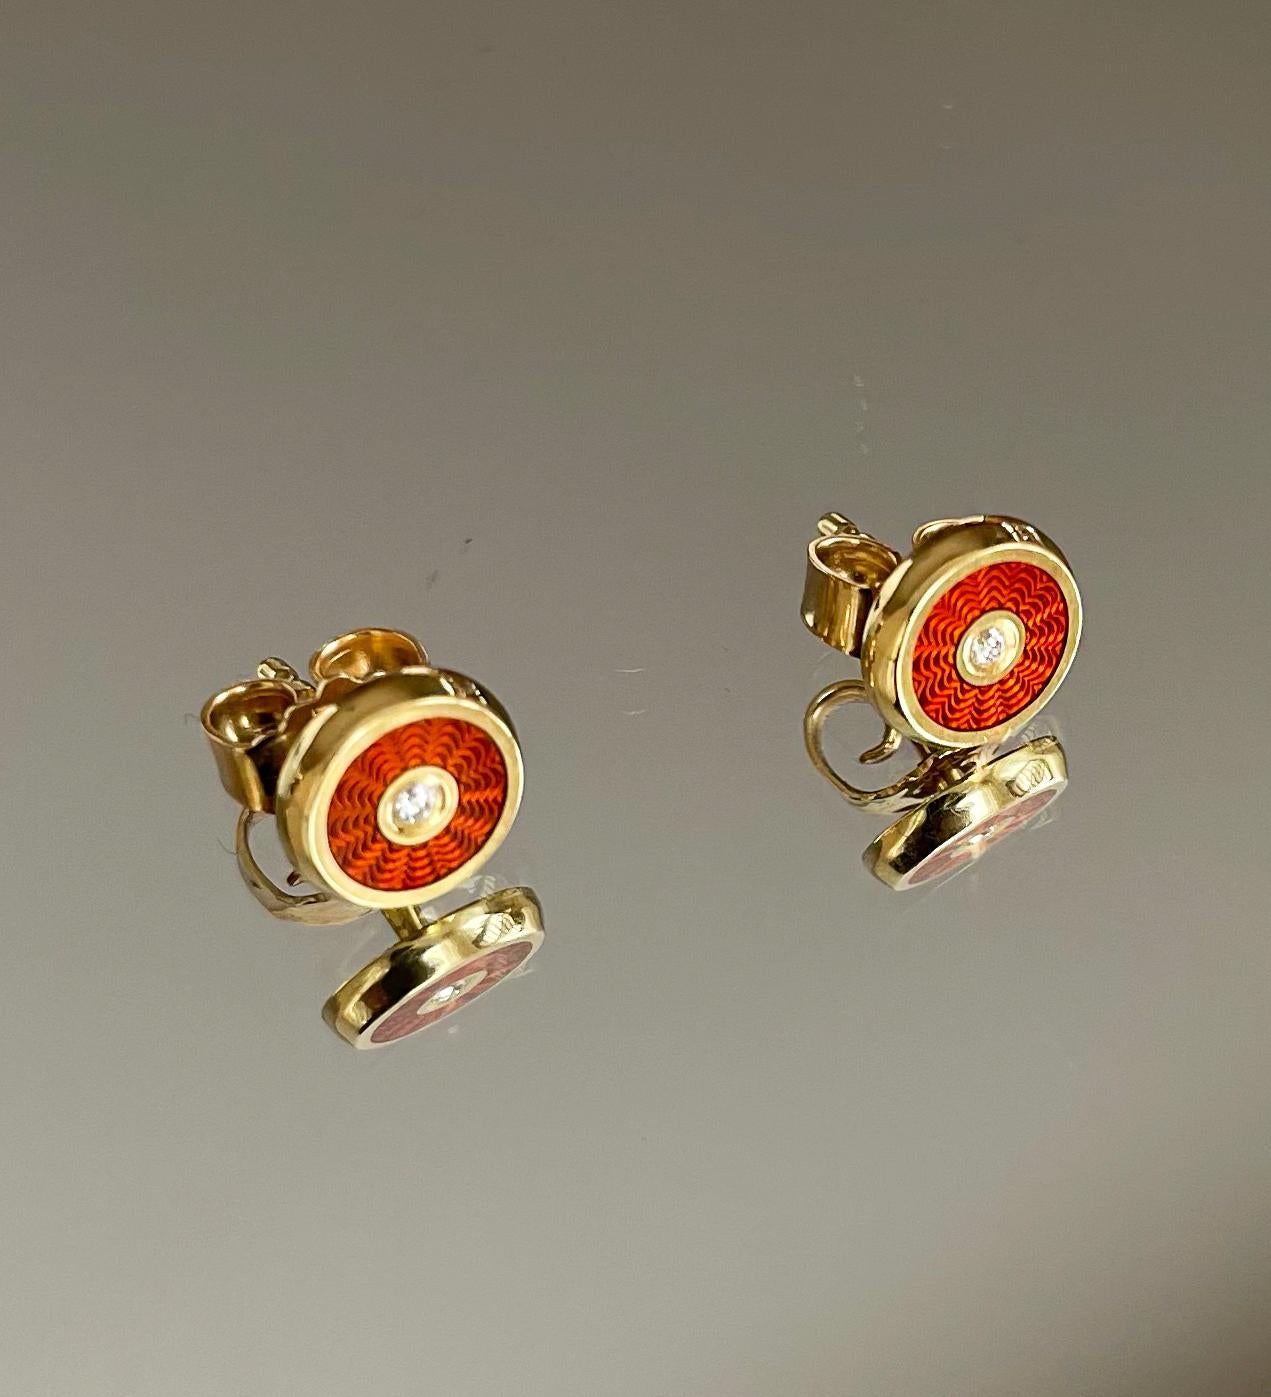 18-Karat Gold Earrings and Pendant Set “Harmony” with Diamonds and Red Enamel For Sale 1